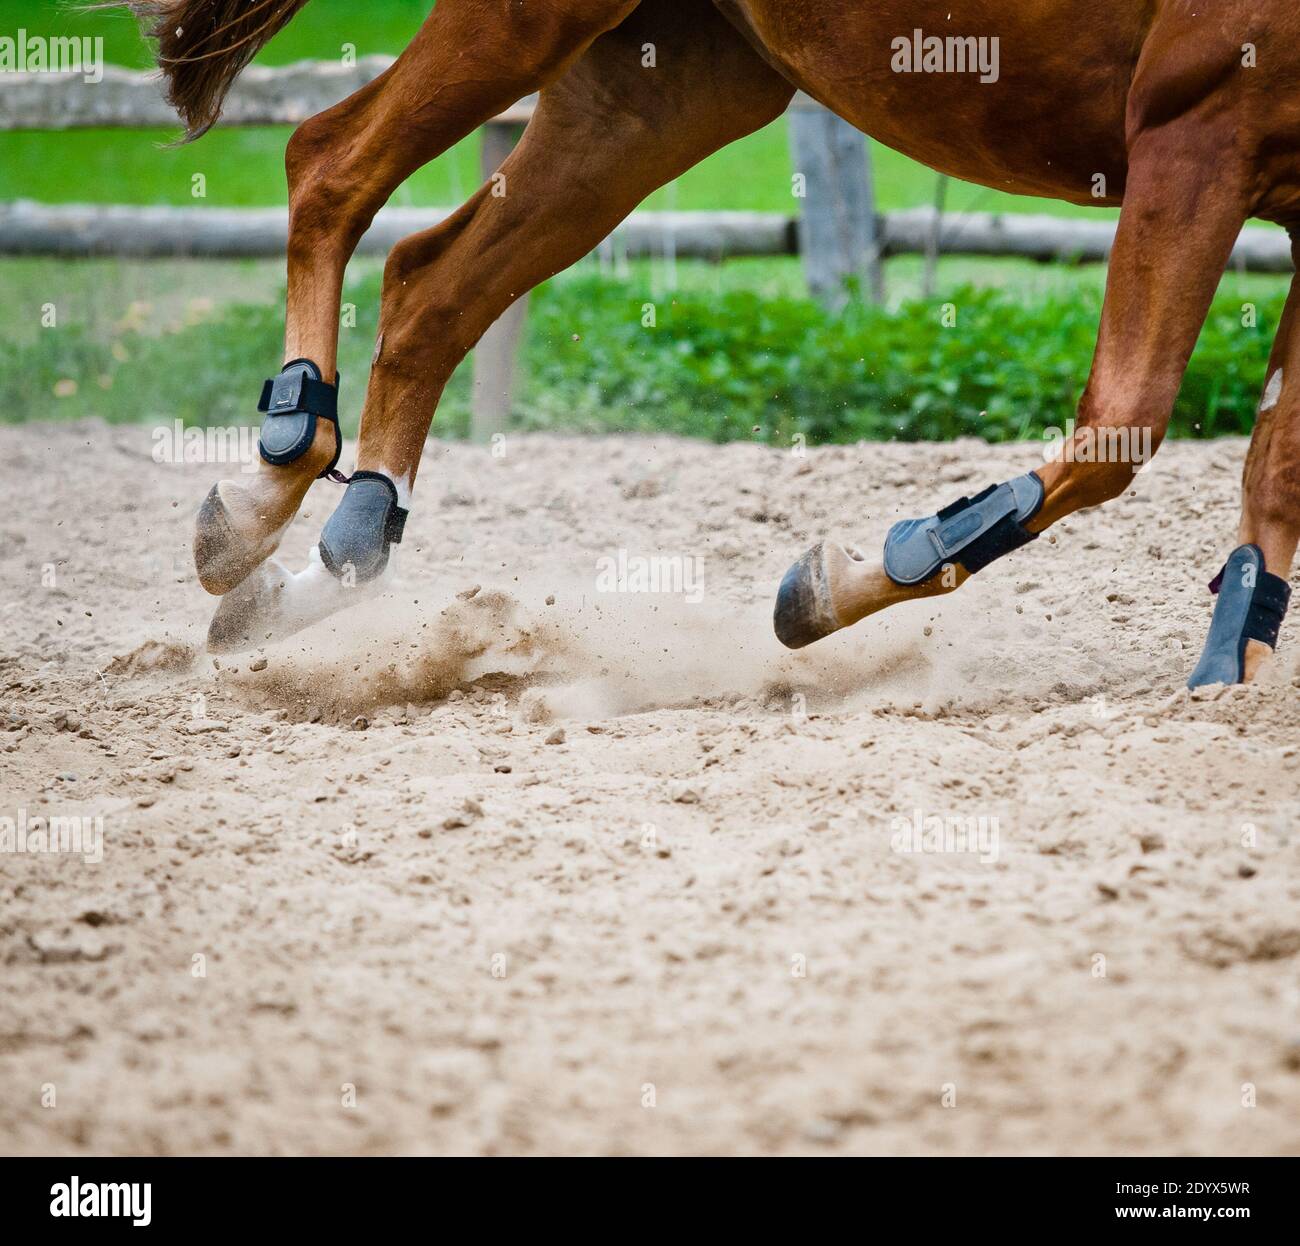 horse training in paddock close up shot of hooves Stock Photo